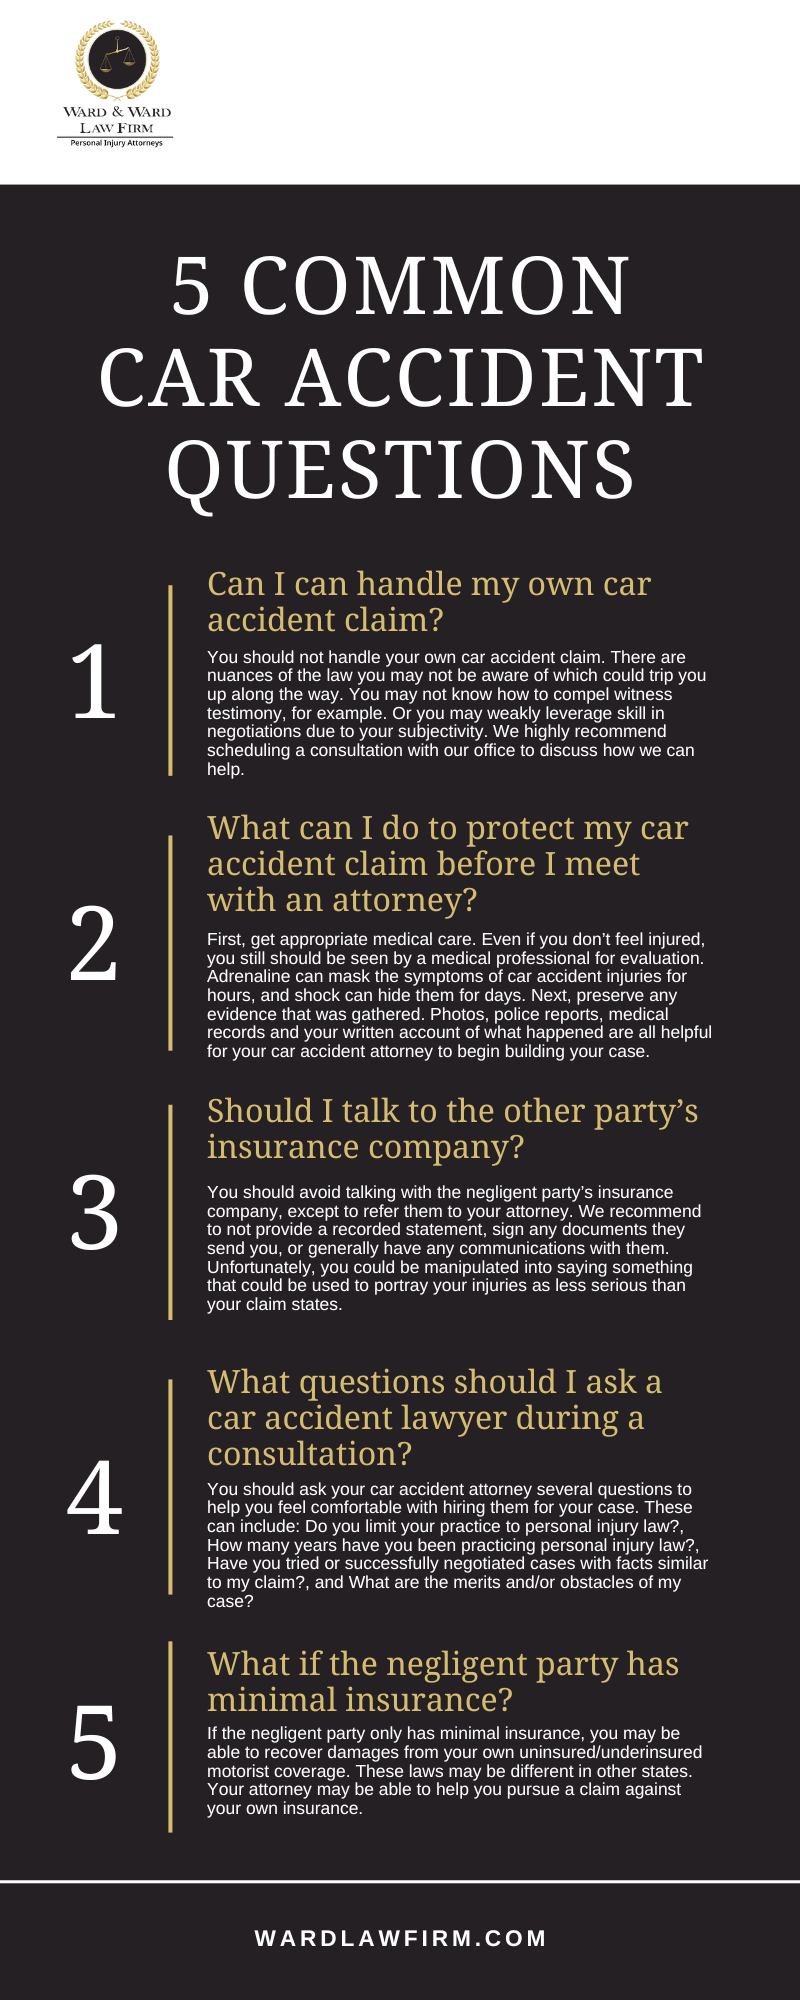 5 Common Car Accident Questions Infographic